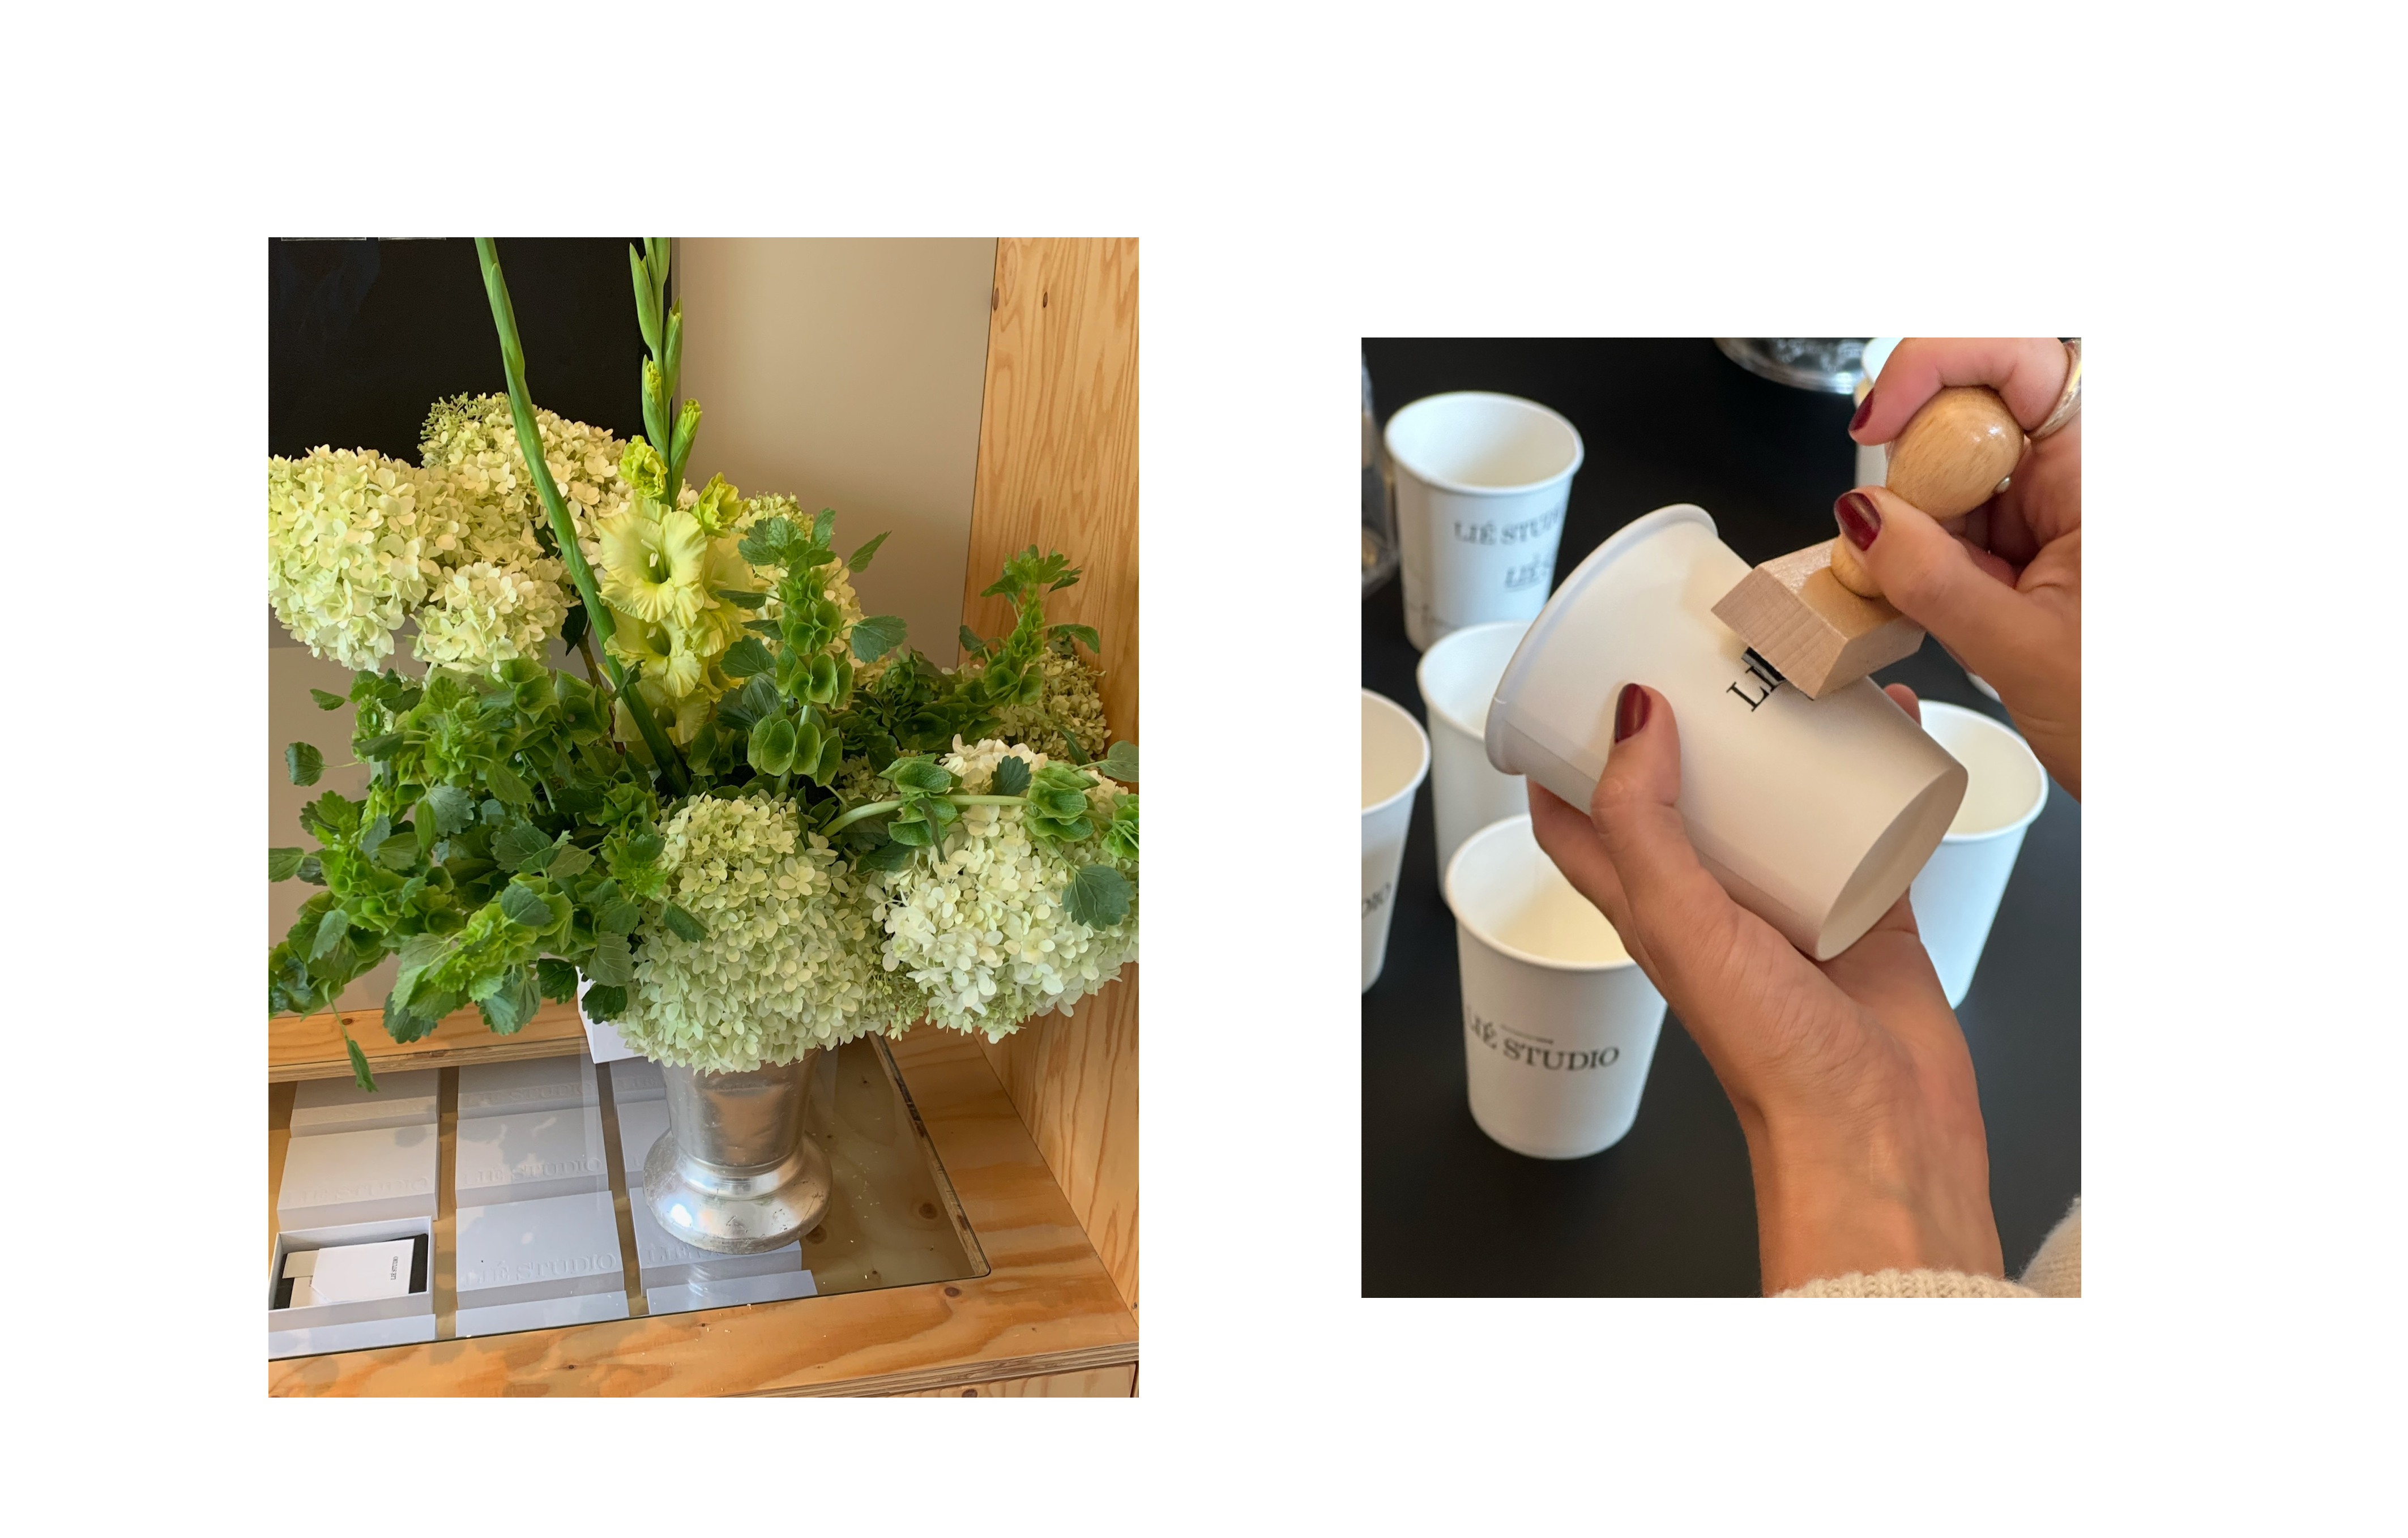 The showroom and pop-up store was decorated with stunning flower bouquets and a bit of LIÉ merch such as cute take-away cups